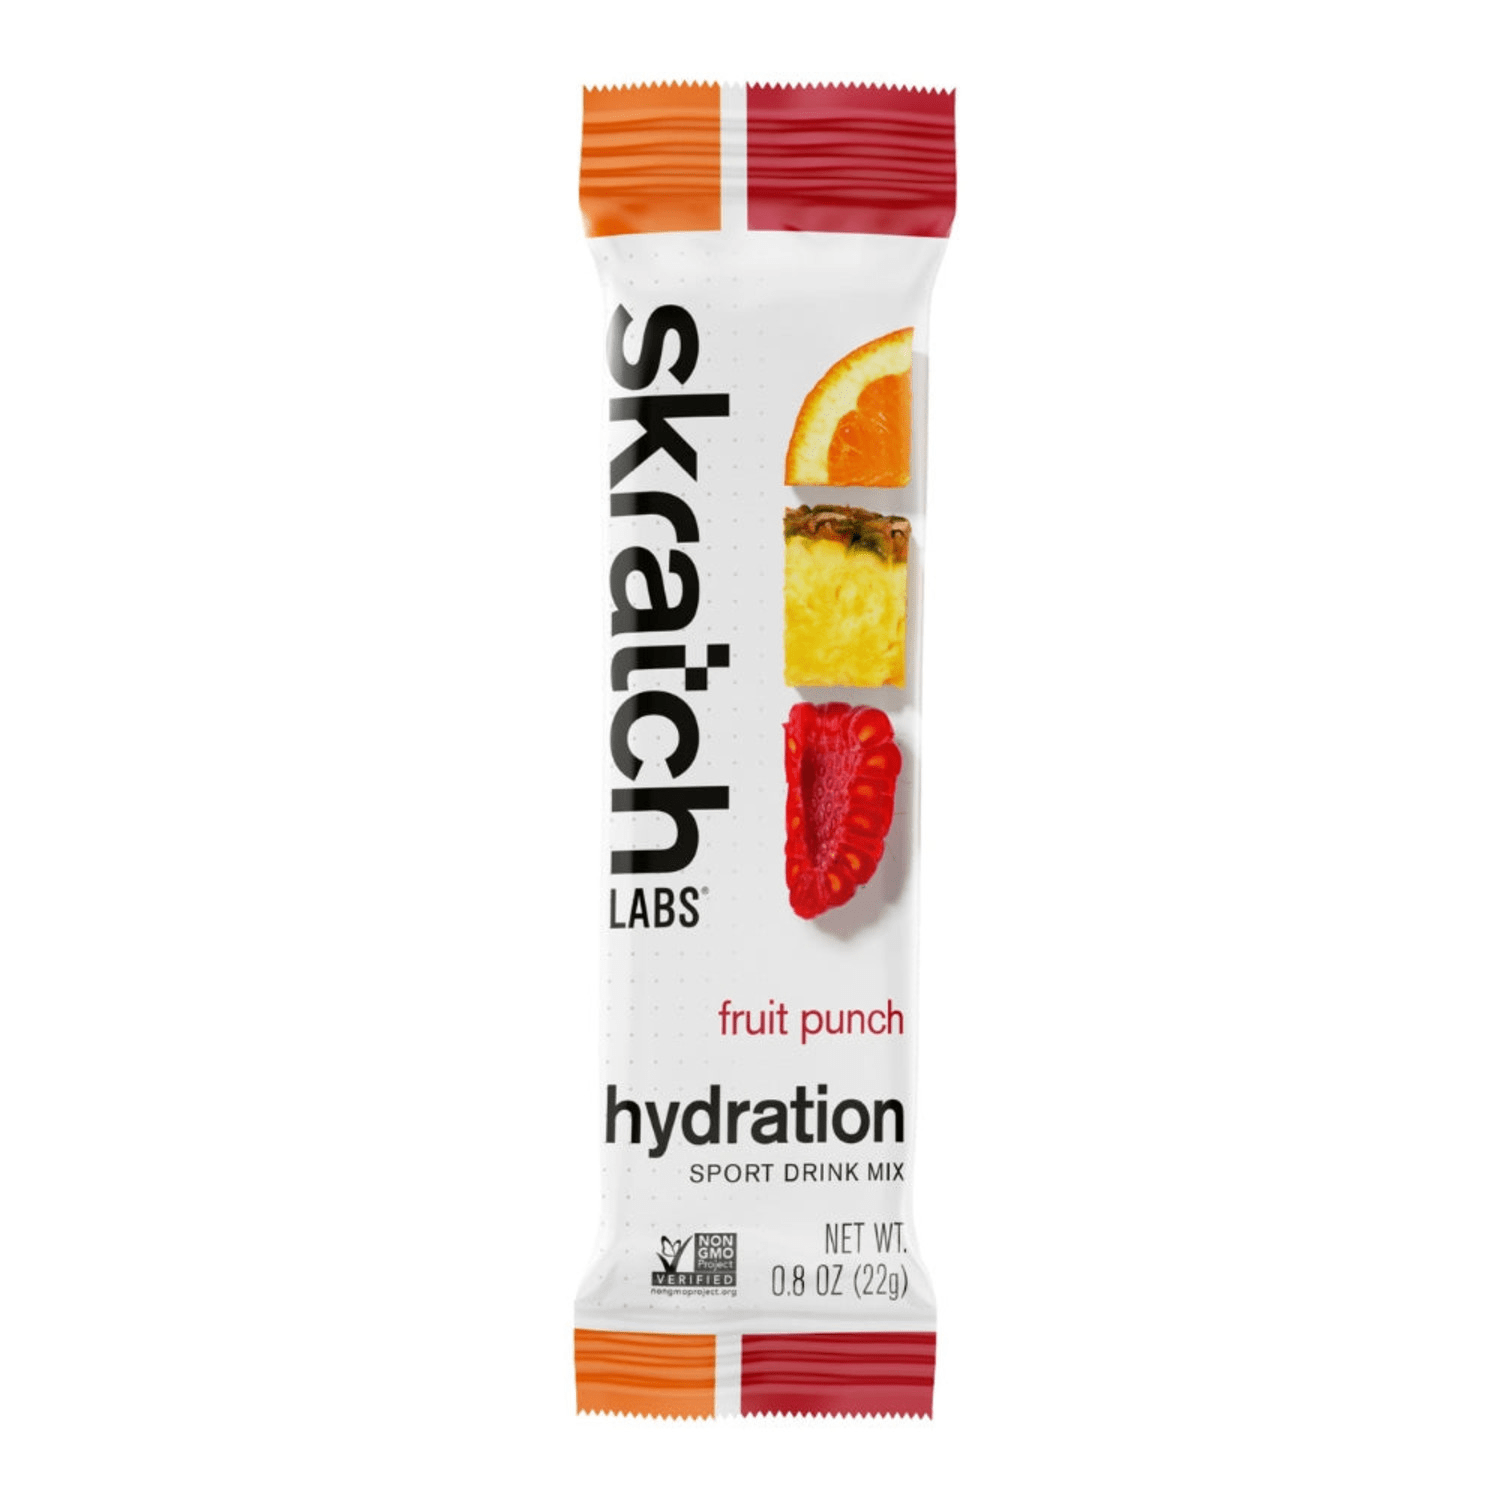 Skratch Labs Sport Hydration Drink Mix Box of 20 Fruit Punch Other - Nutrition - Drink Mixes